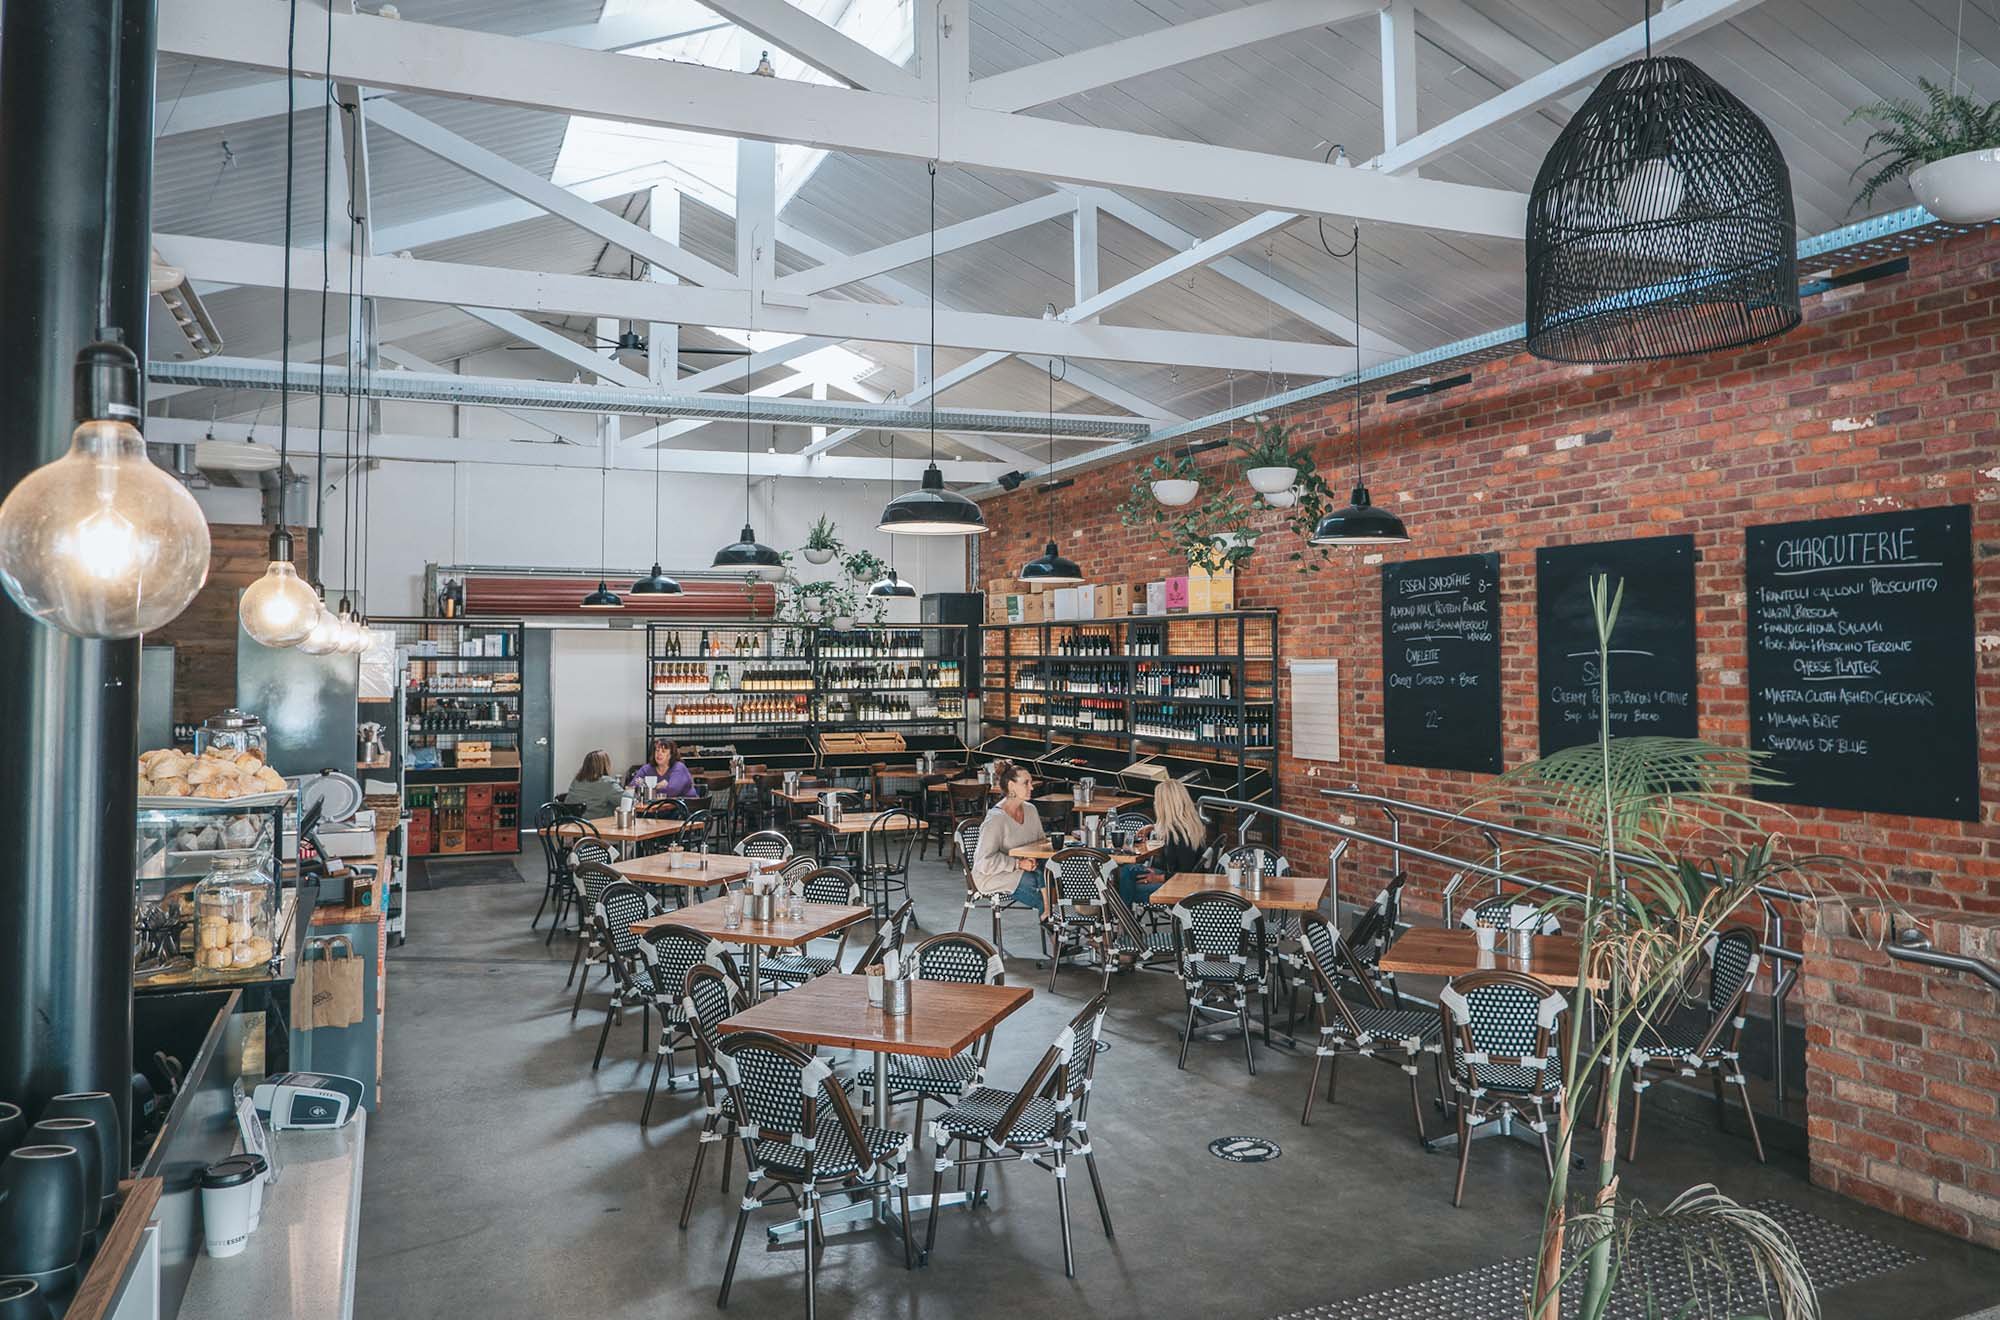  Our large industrial-feeling venue space is a great spot for your next gathering.  